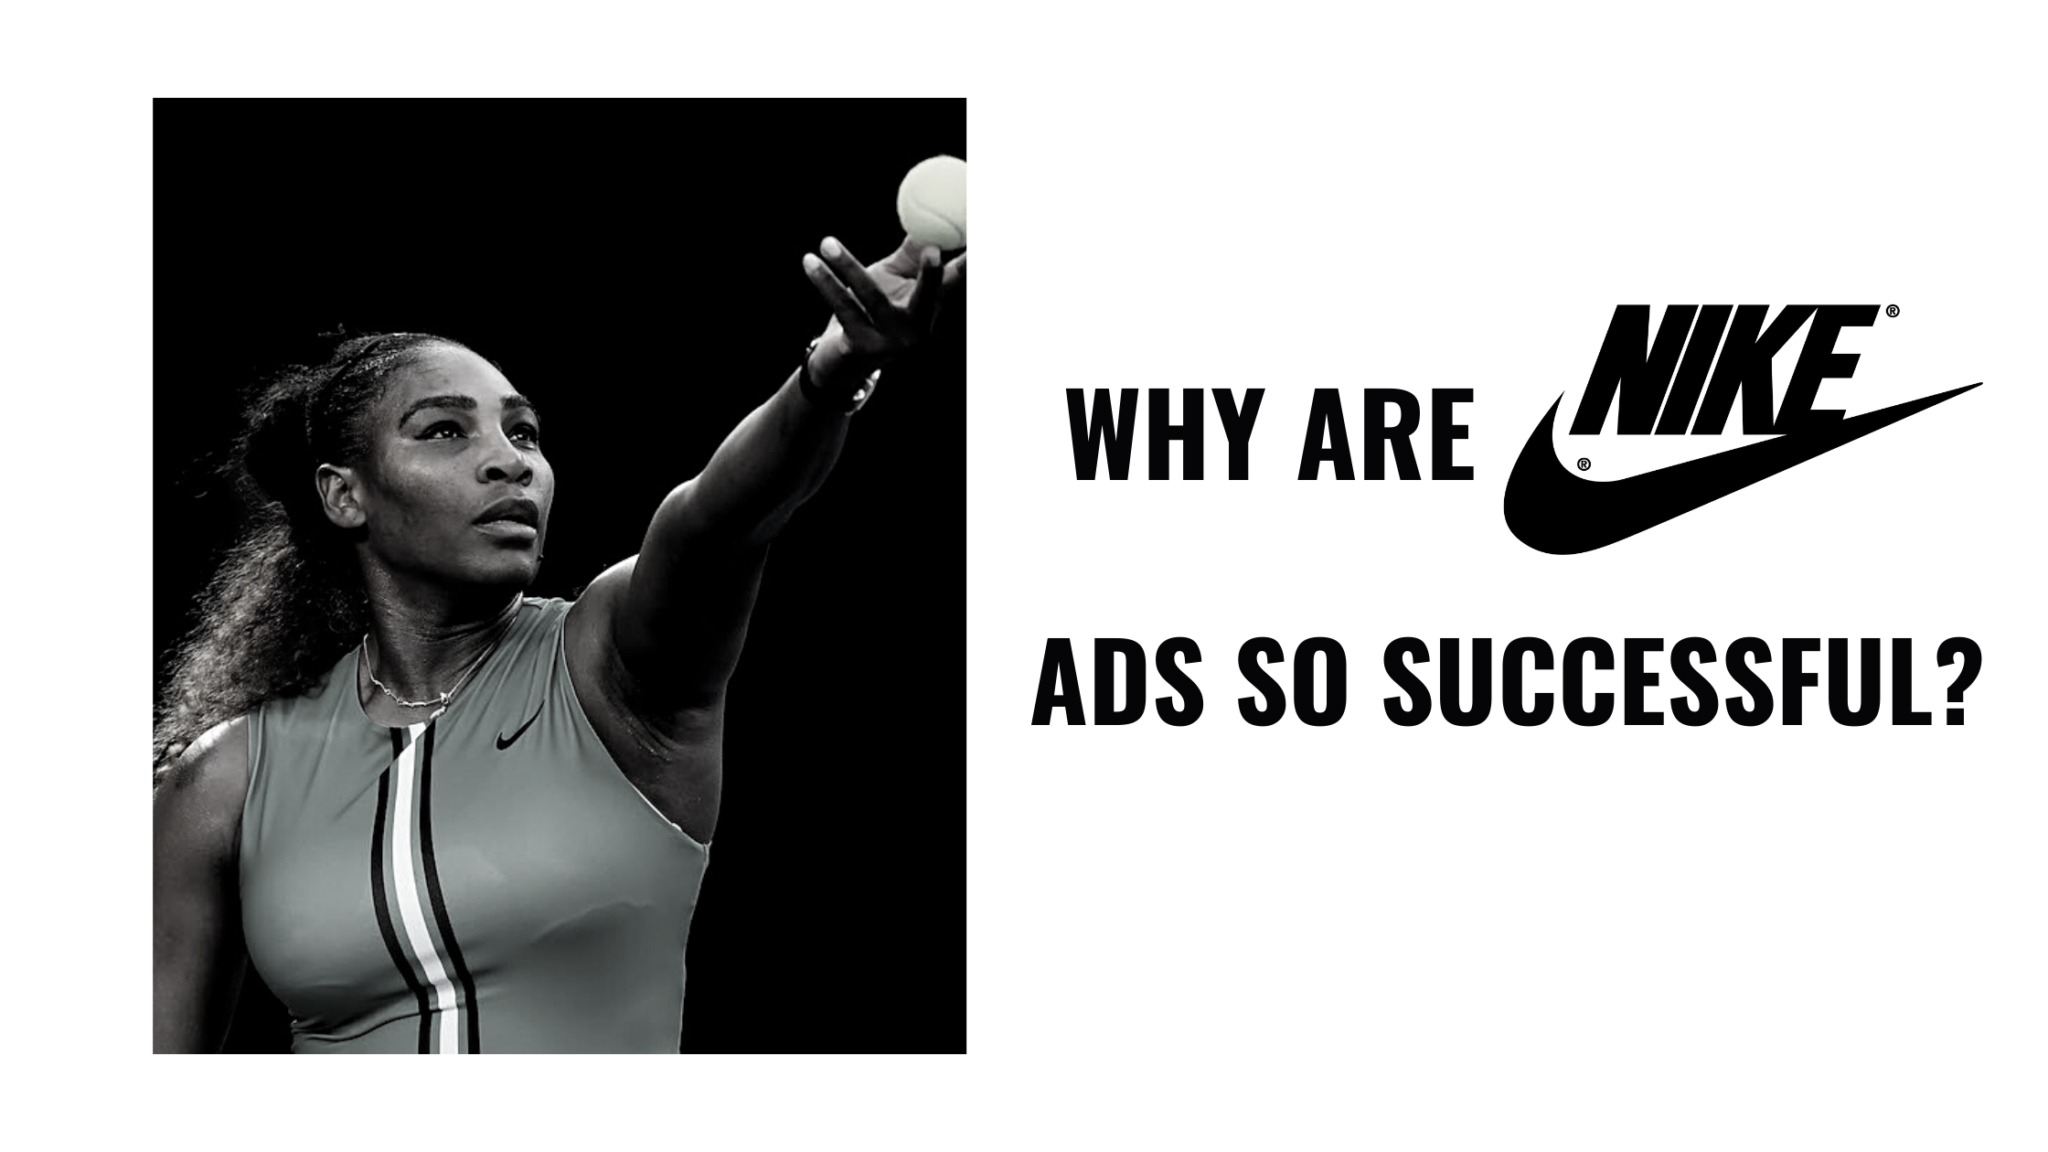 Why are Nike ads so successful? Symmetry